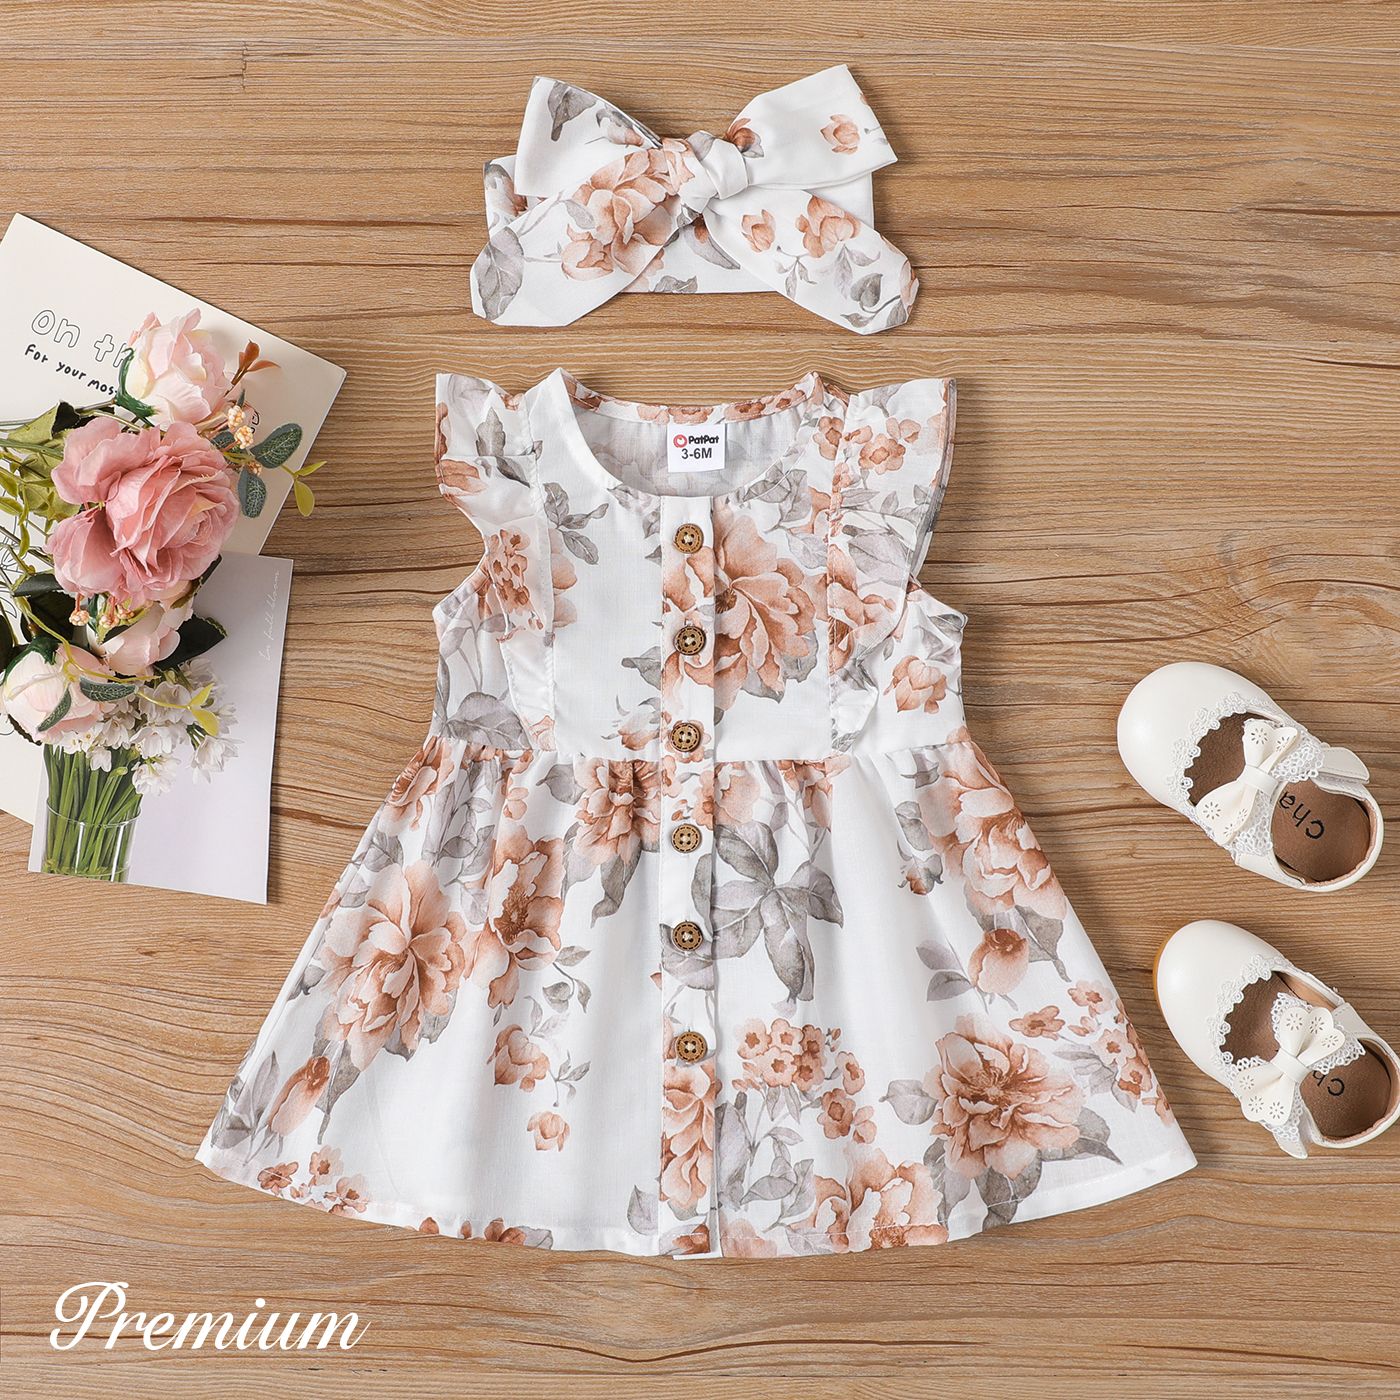 2pcs Baby Girl 100% Cotton Solid Or Allover Floral Print Flutter-sleeve Dress With Headband Set